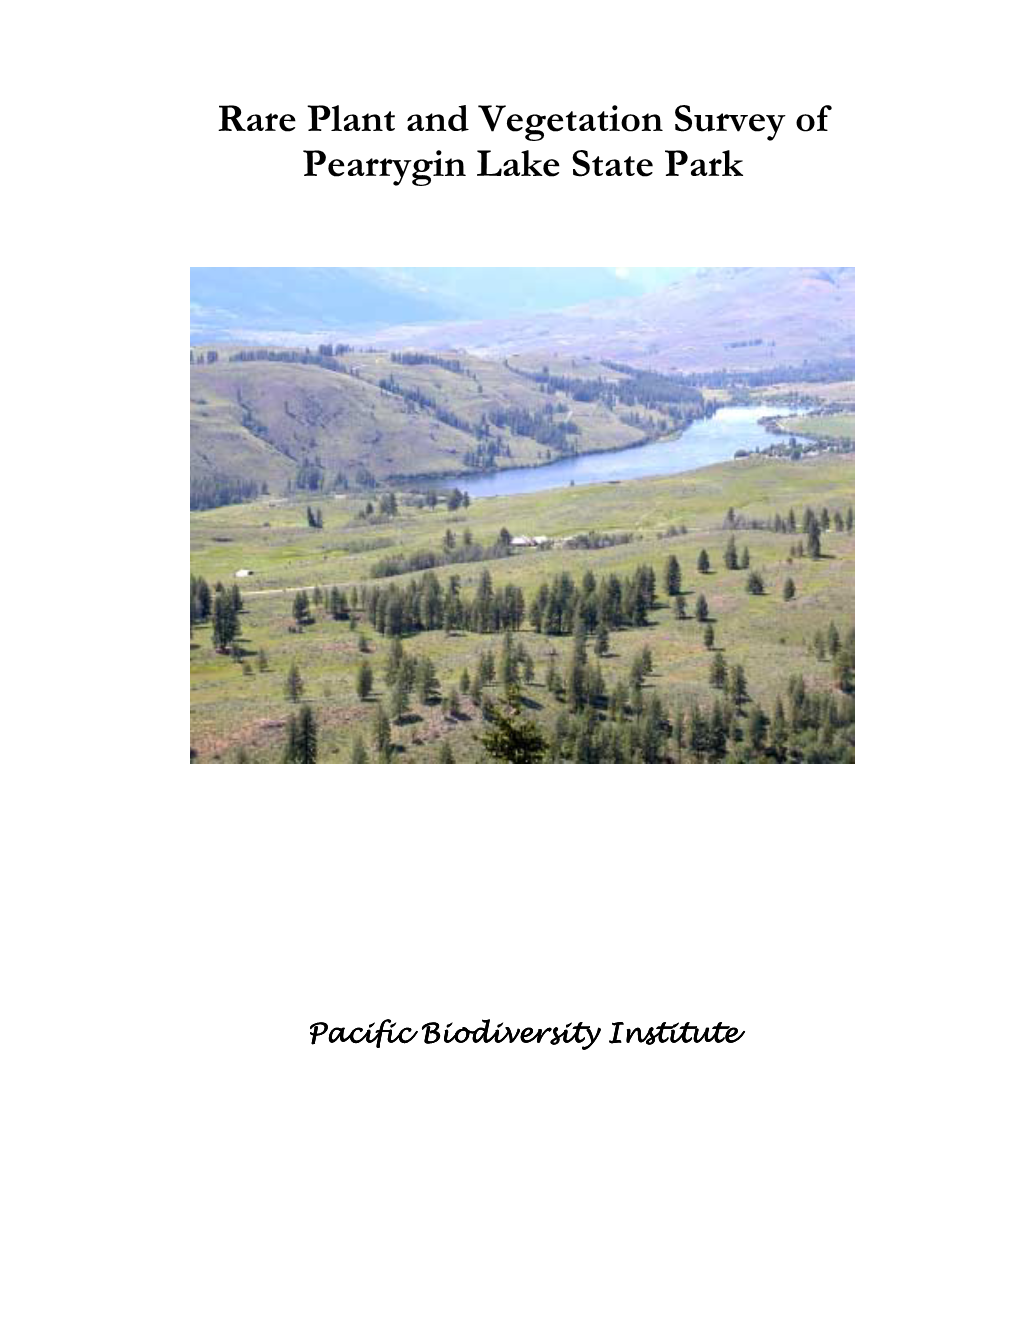 Pearrygin Lake State Park